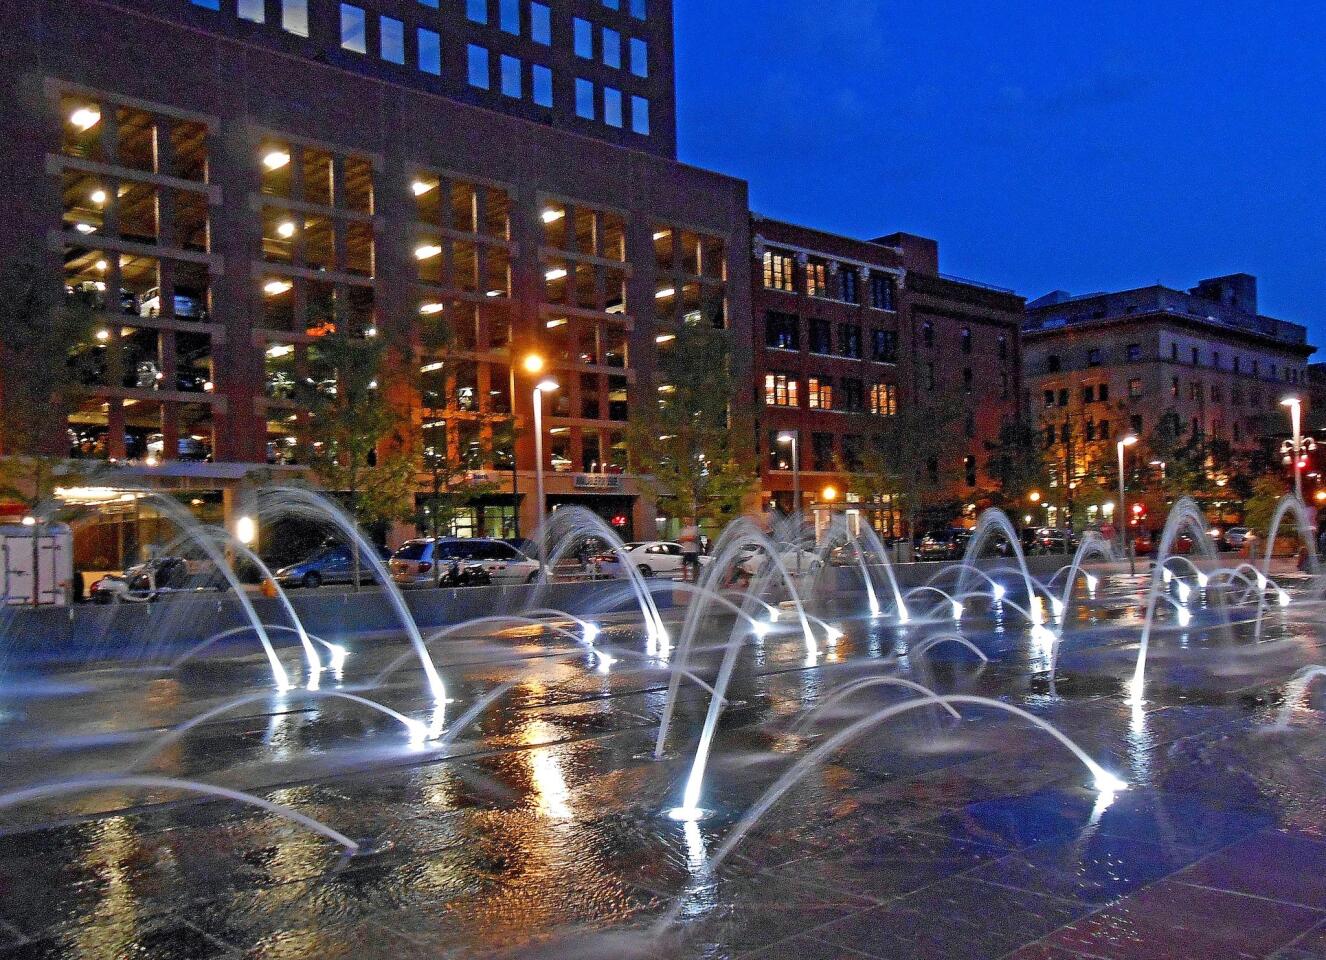 The fountains outside the newly redone Union Station downtown. One perk of staying with Airbnb hosts: info that you might not otherwise learn. Joseph Chehouri and Brenton Weyi recommended seeing the renovated station and eating at the Kitchen Next Door.